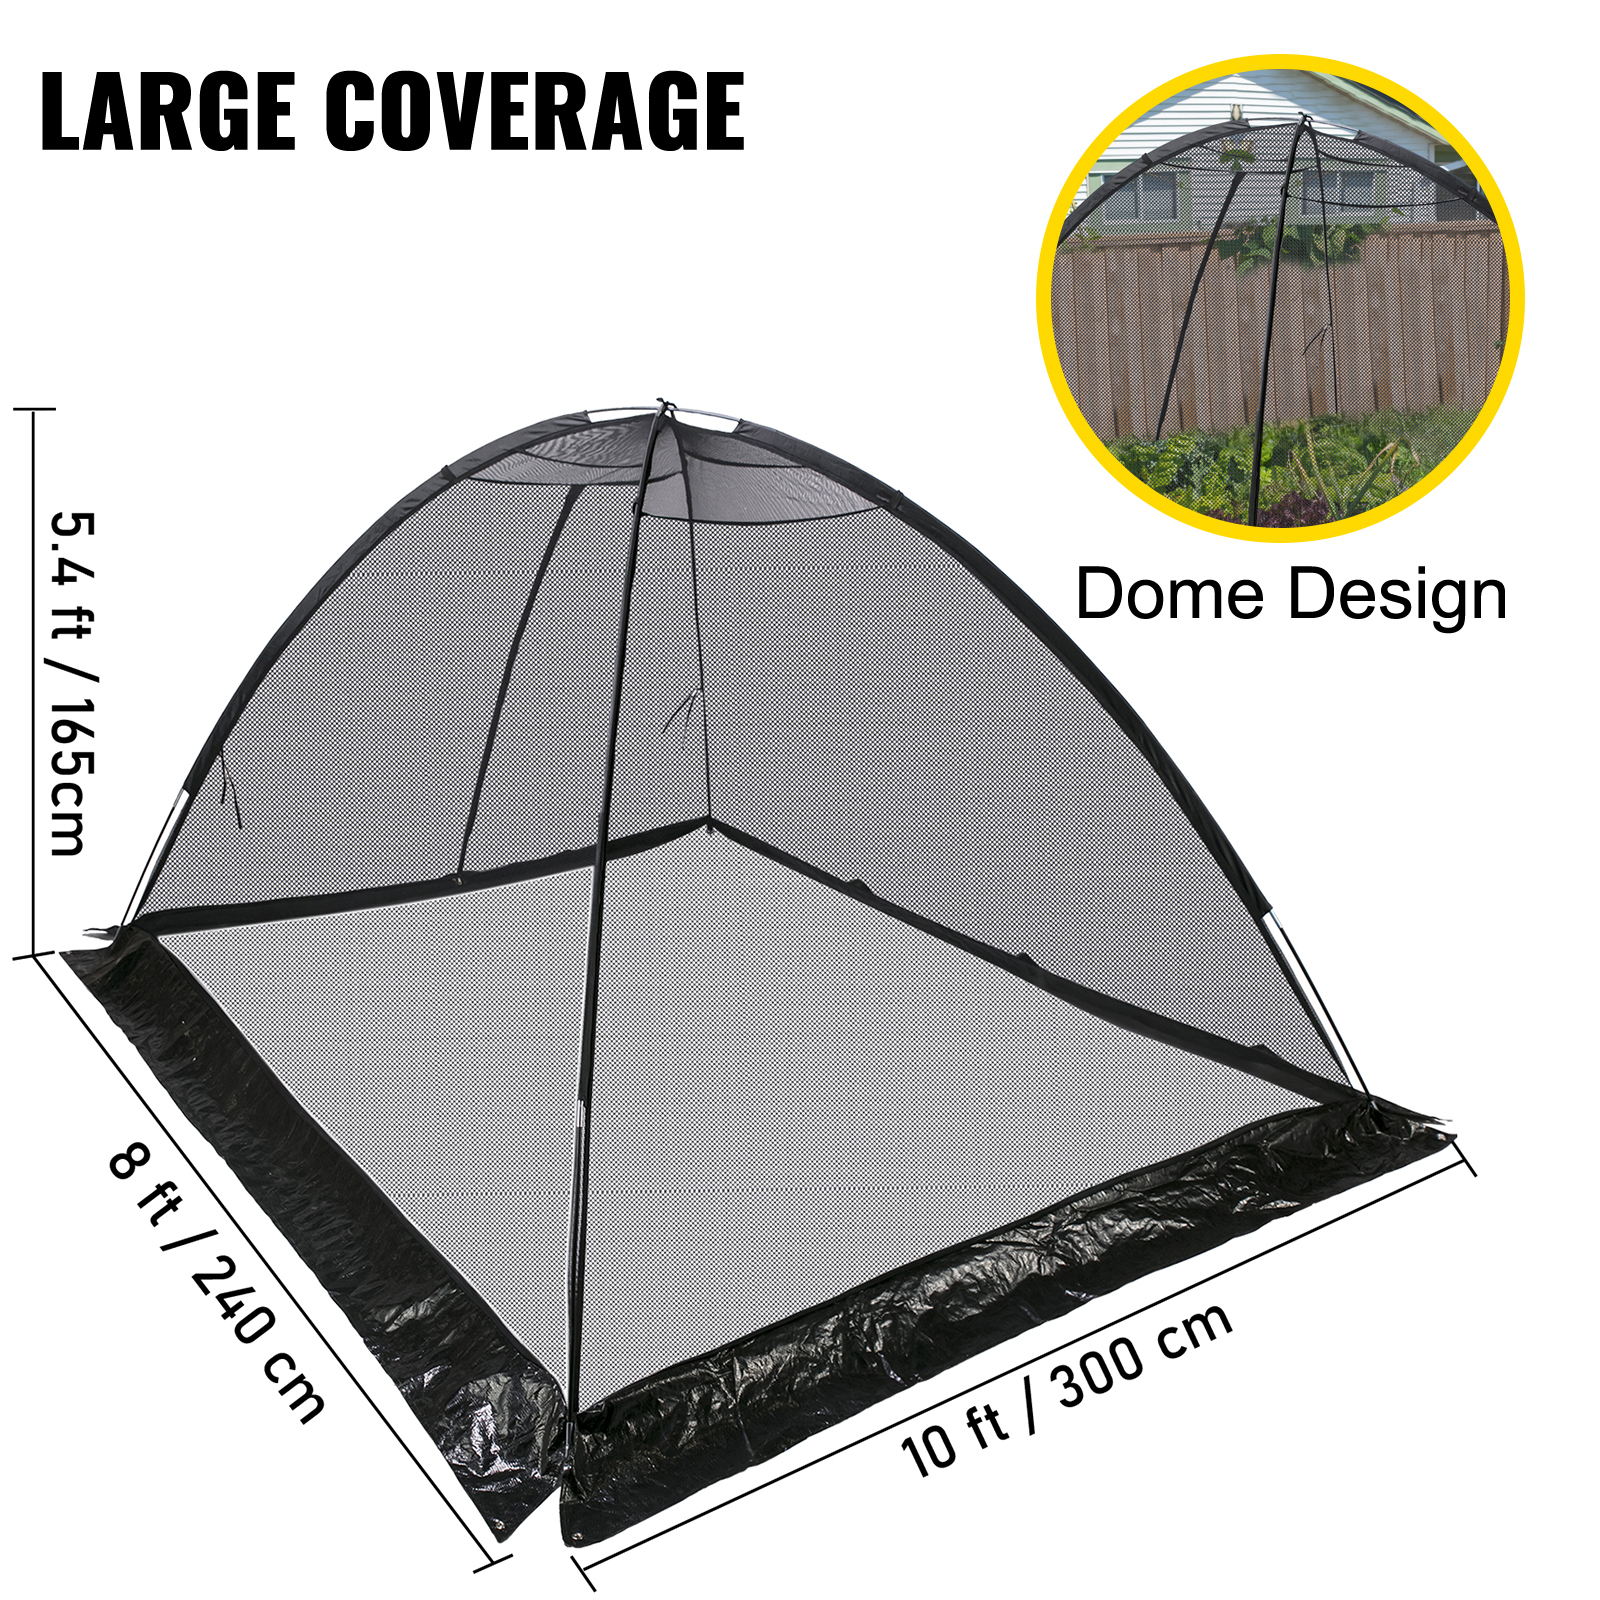 9x12 FT Garden Pond Net Happybuy Pond Cover Dome 1/2 inch Mesh Dome Pond Net Covers with Zipper and Wind Rope Black Nylon Pond Netting for Pond Pool and Garden to Keep Out Leaves Debris and Animals 